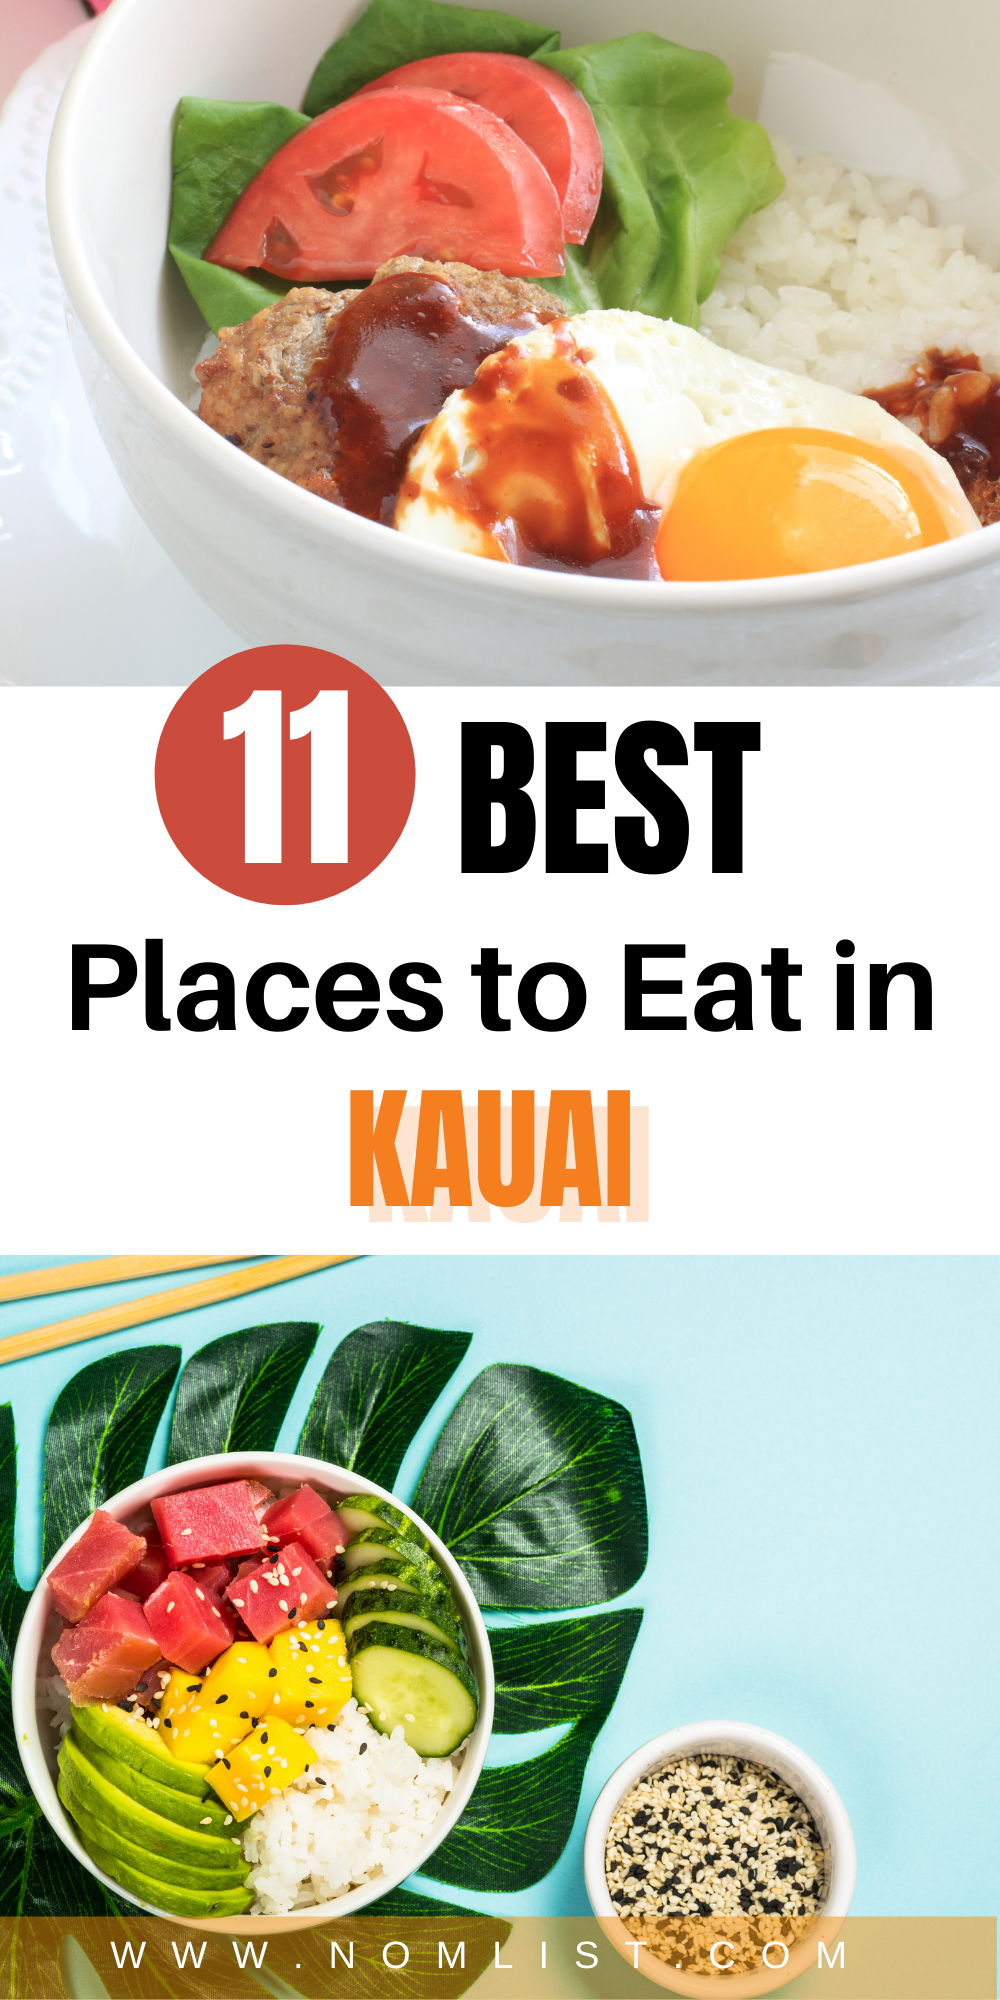 Many of these local restaurants below feature delicious plate lunches! Here is our list of the 11 top local places to eat in Kauai!